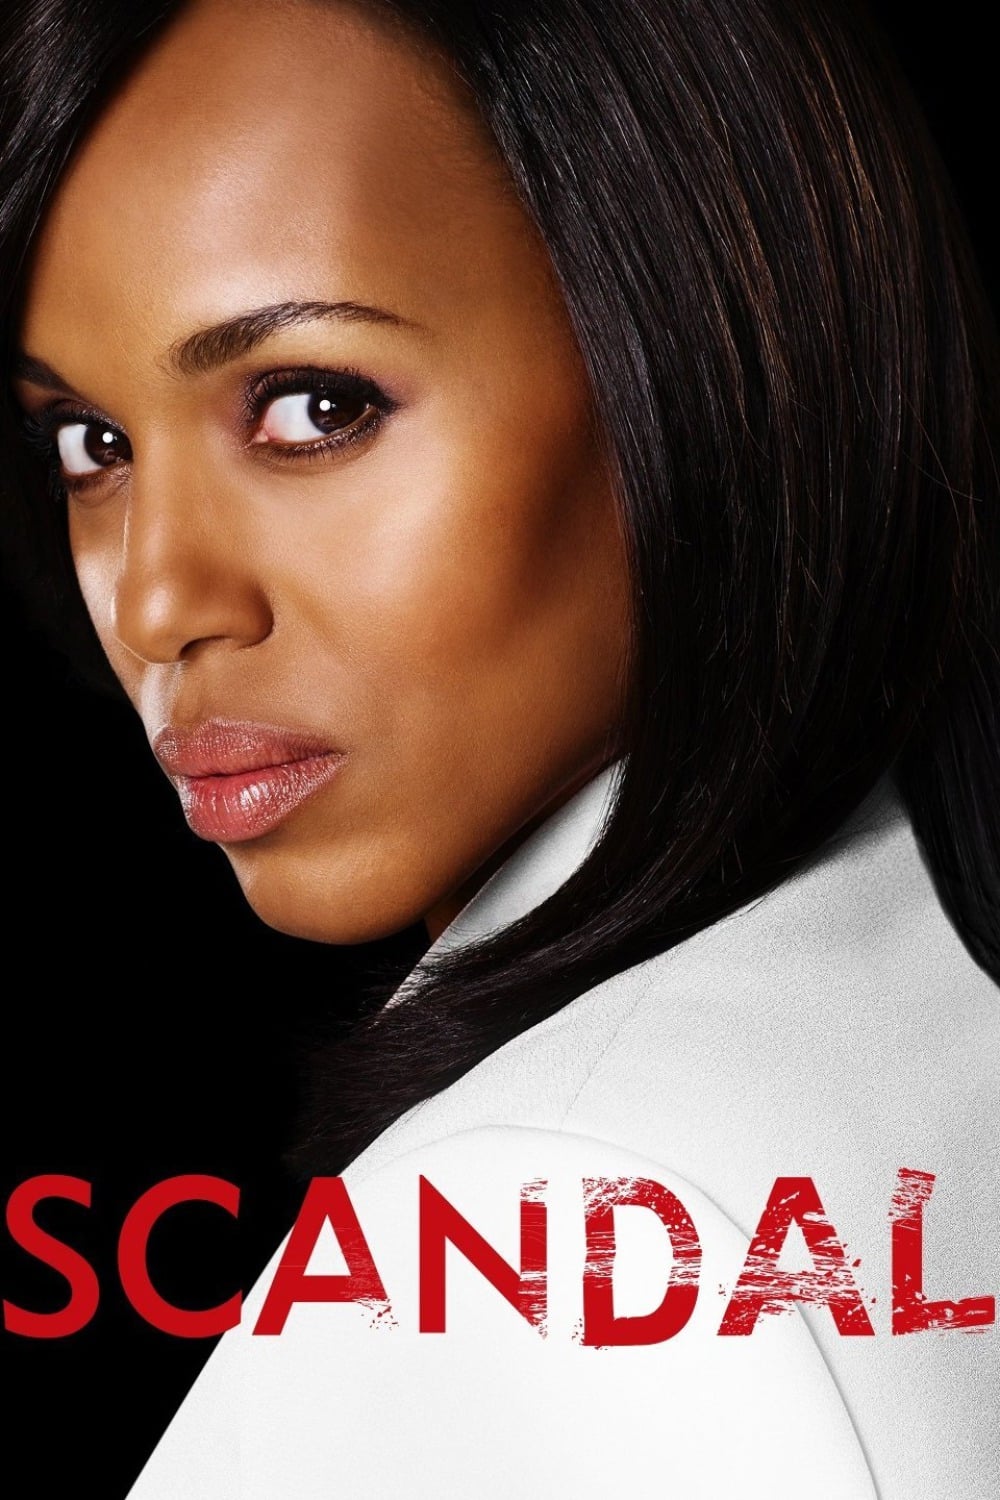 Scandal Will Not Get Series 8, ABC Confirmed